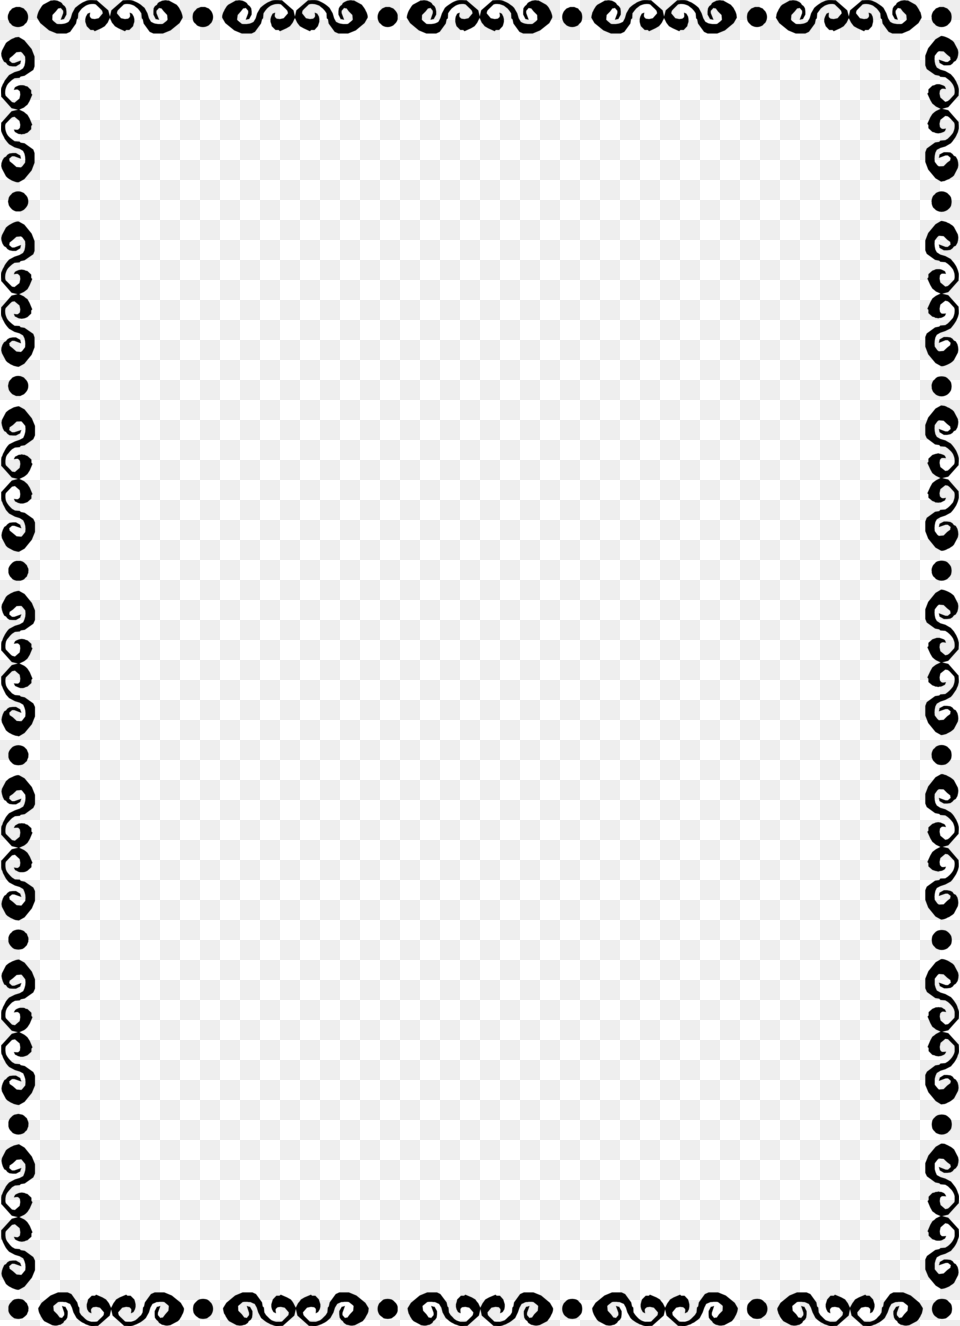 Border Black Stock Photo Illustration Of A Fancy Blank, Gray Png